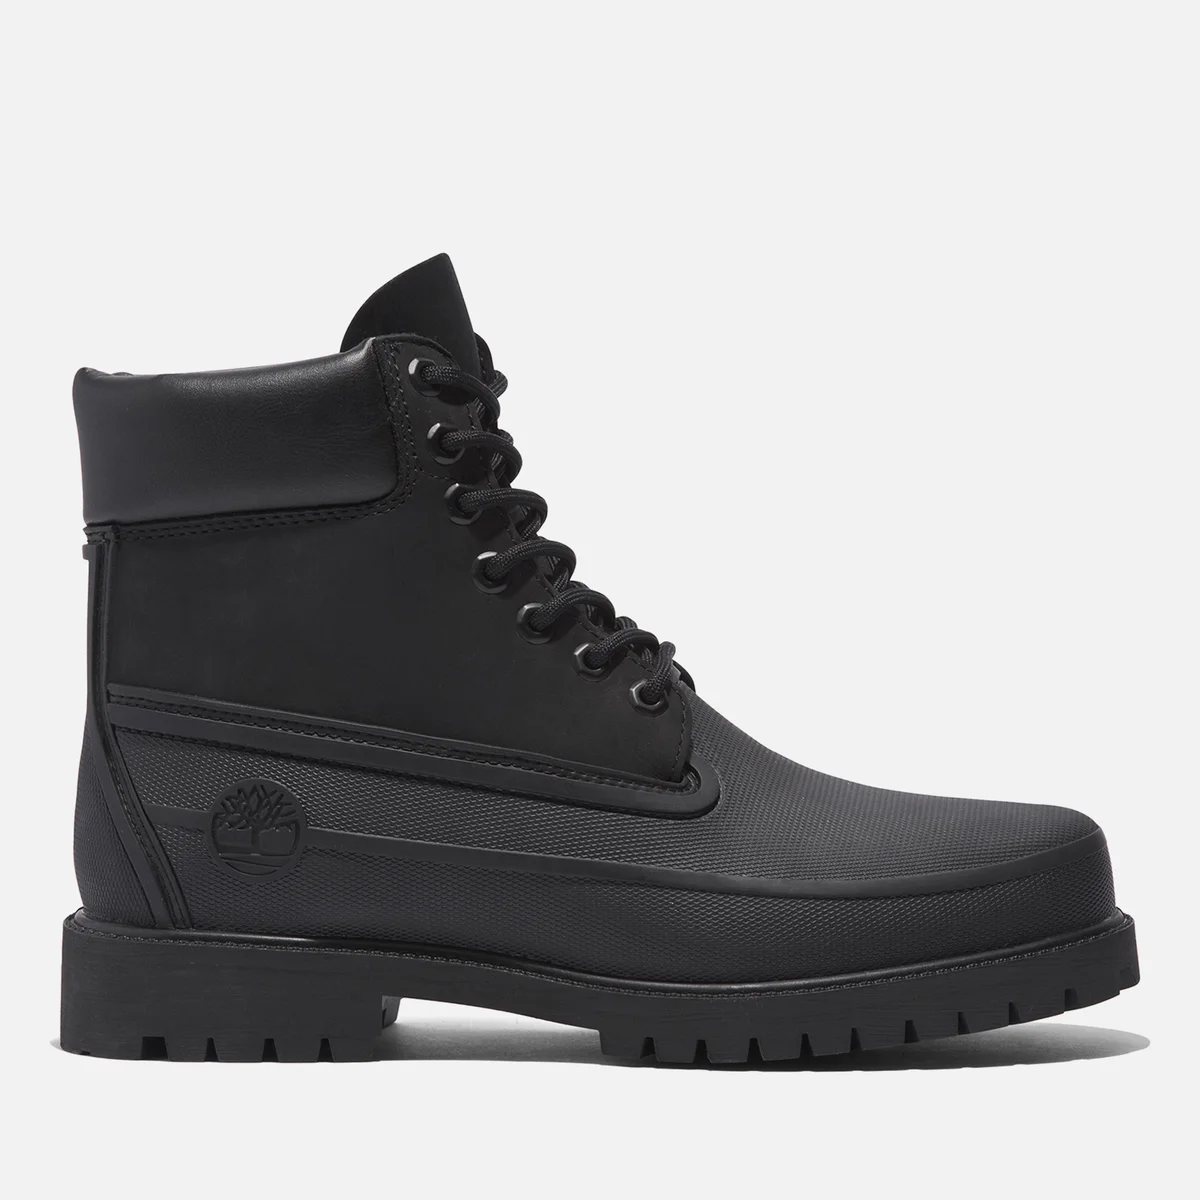 Timberland Men's Nubuck and Leather Ankle Boots Image 1